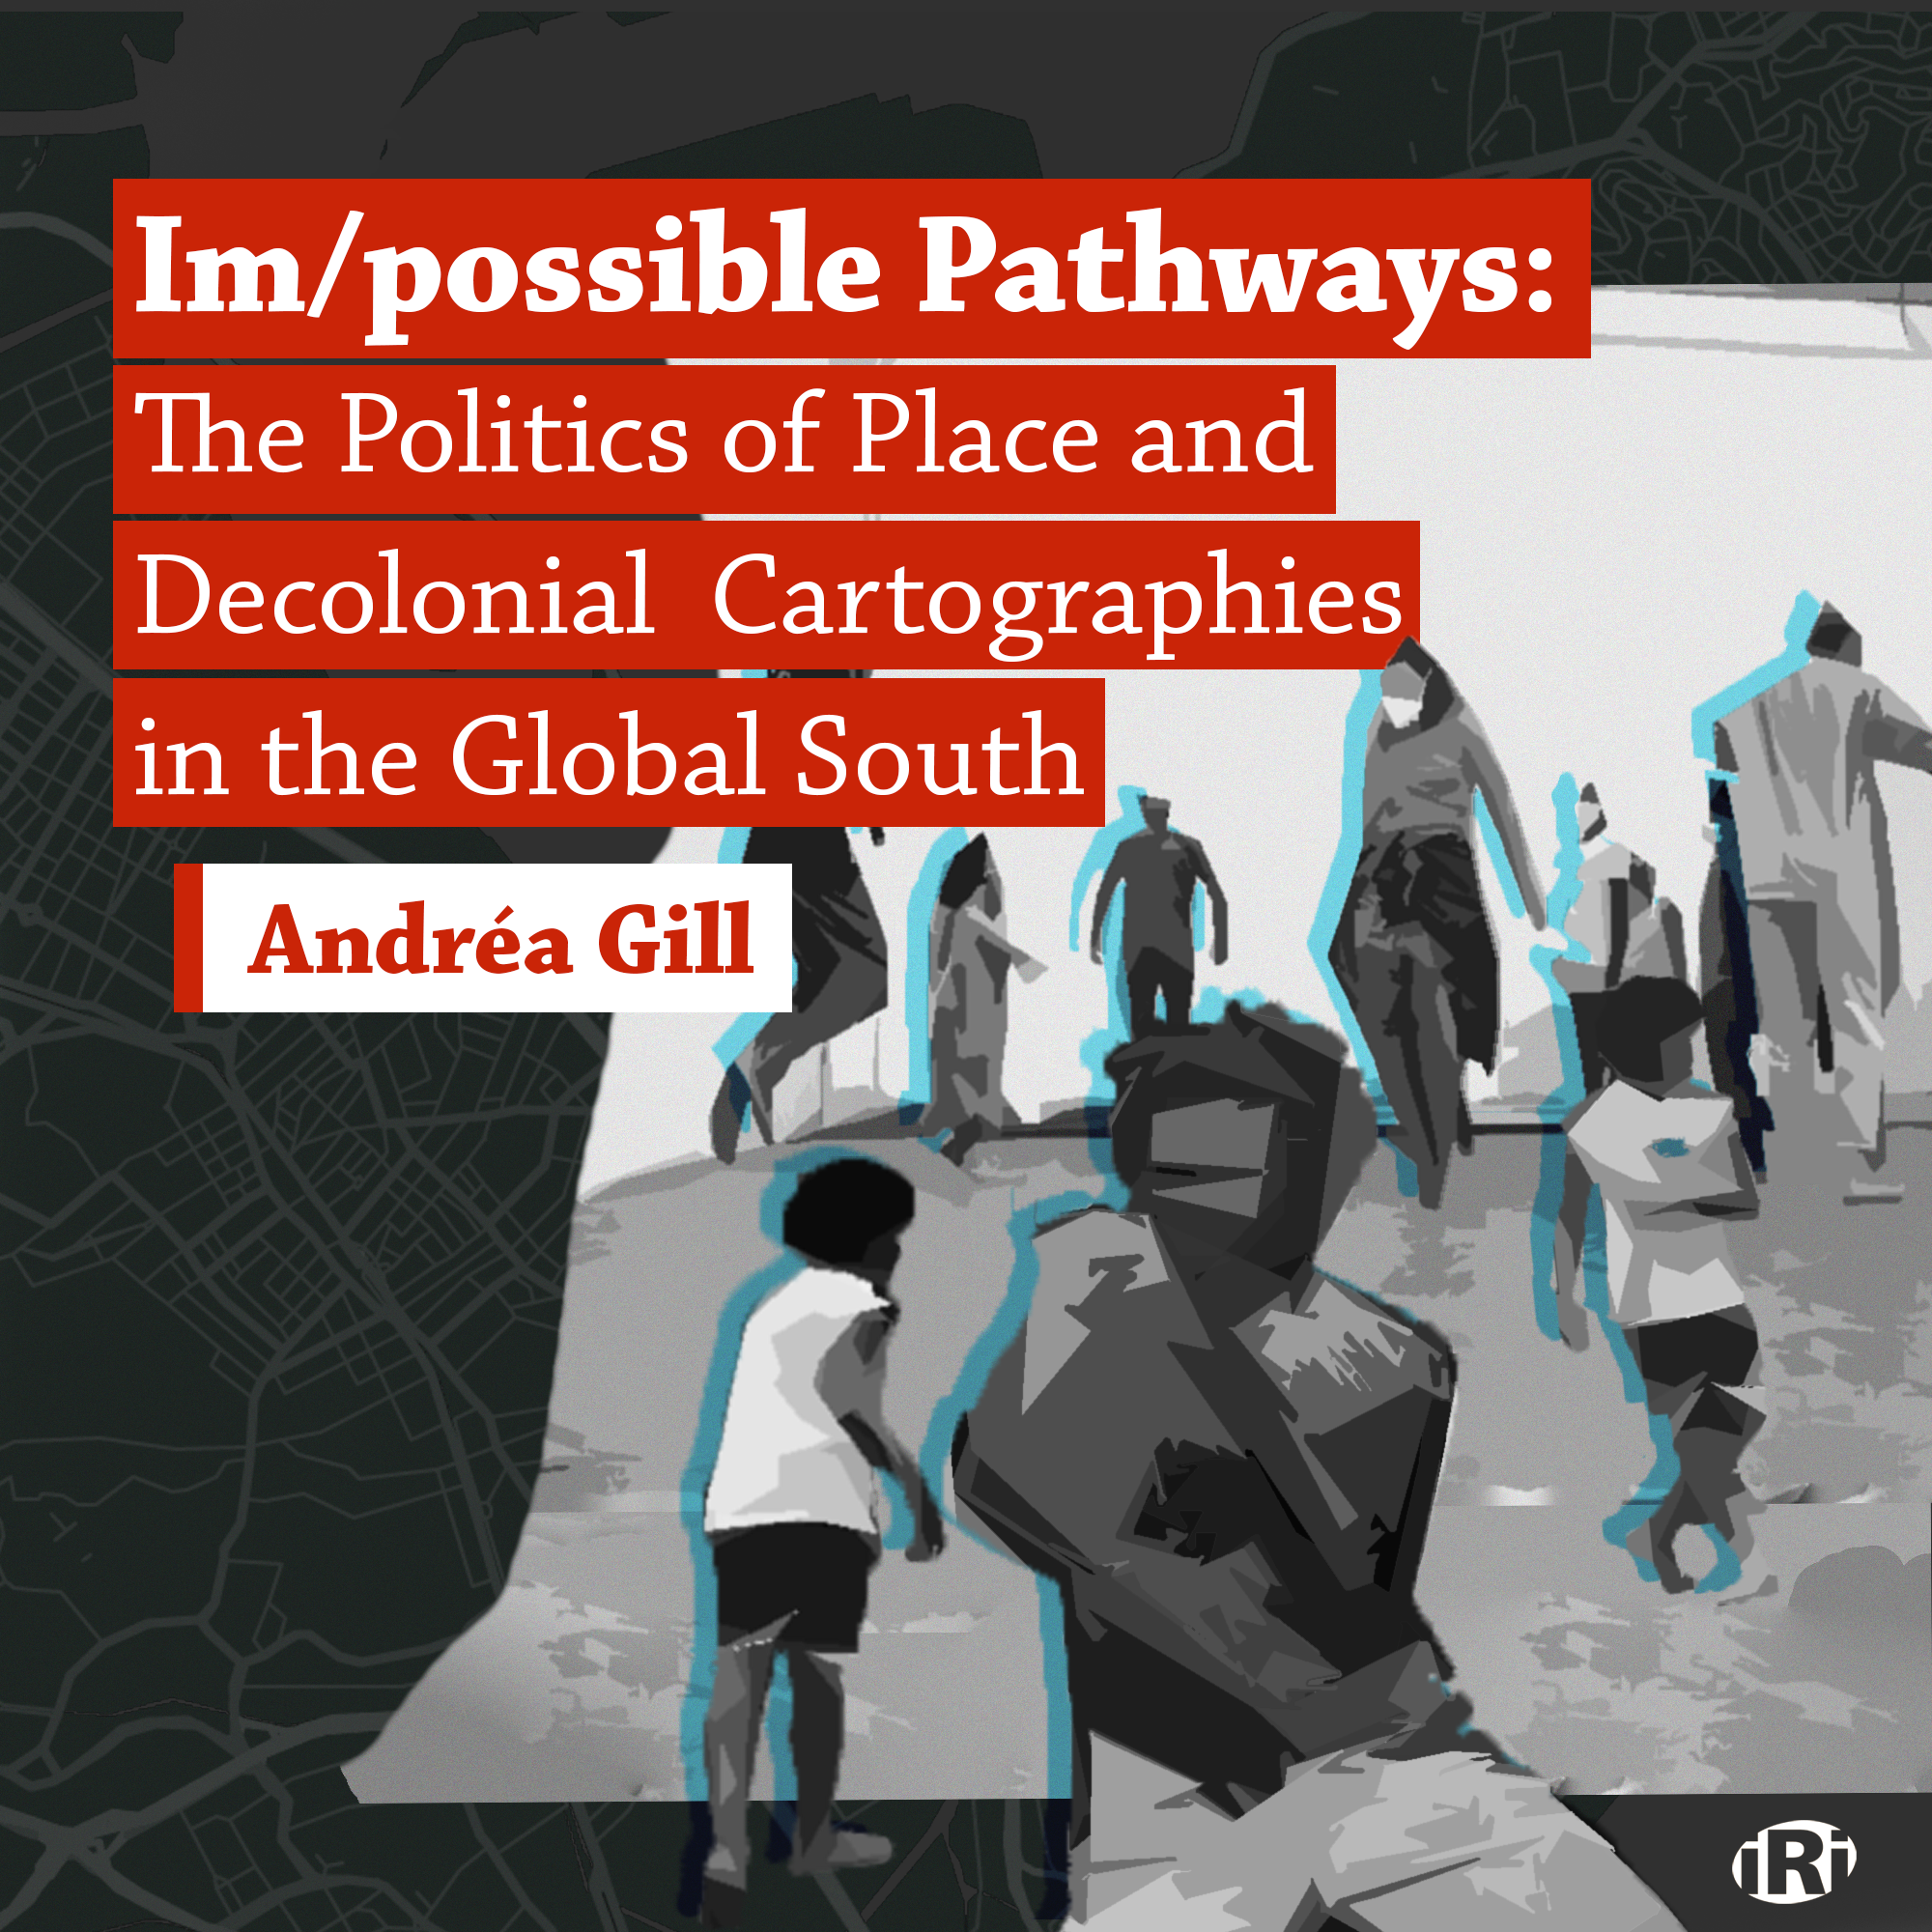 Im/possible Pathways: The Politics of Place and Decolonial Cartographies in the Global South